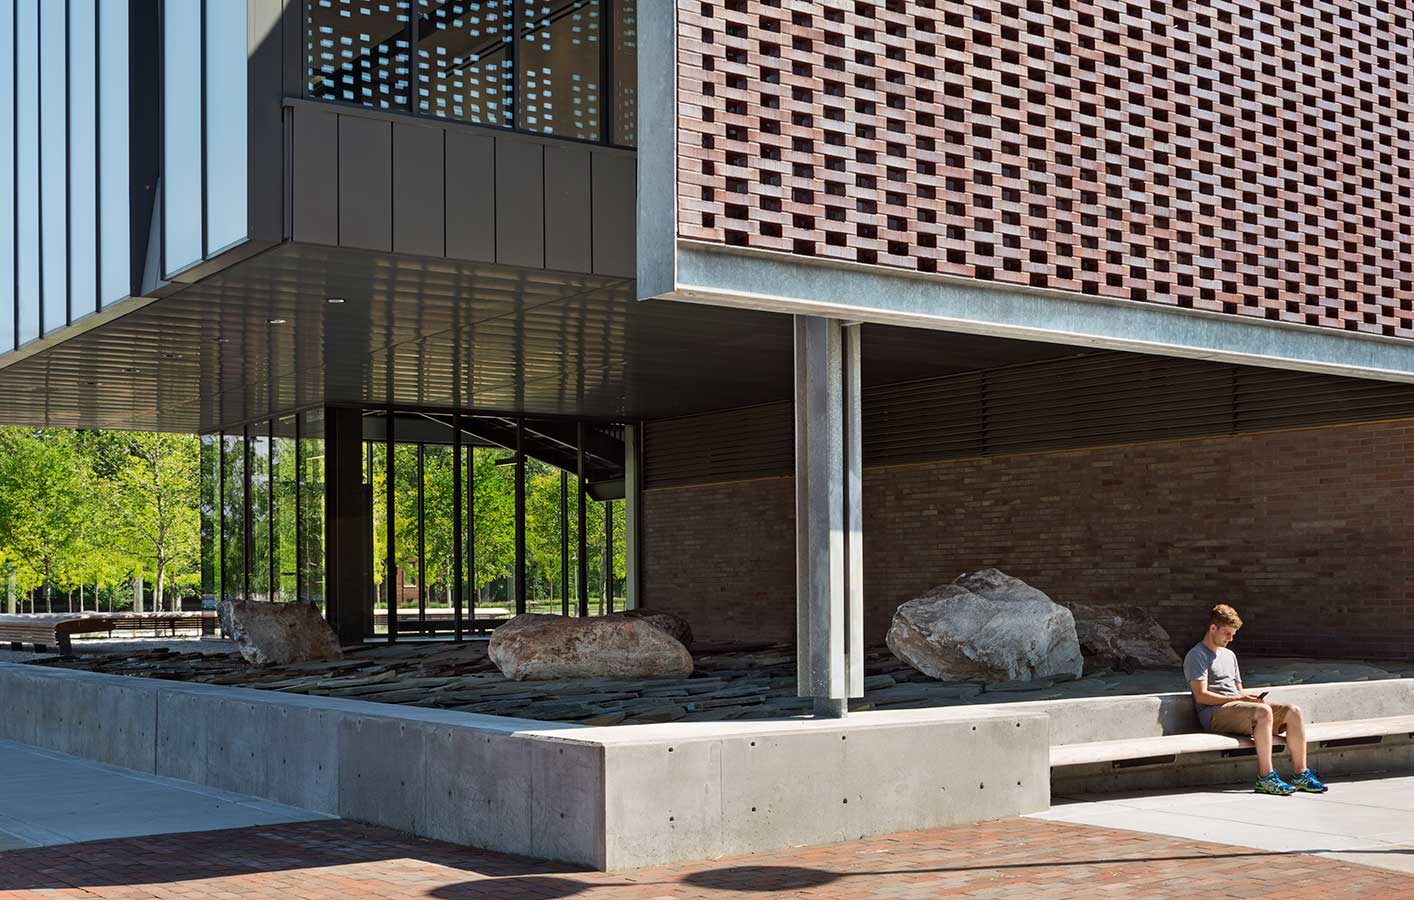 <p>The use of brick in the innovative solar shade honors the history of Philadelphia's Navy Yard and links the new facility to the existing buildings on the campus. &nbsp;<br /><br><small>&copy;Michael Moran/OTTO</small></p>